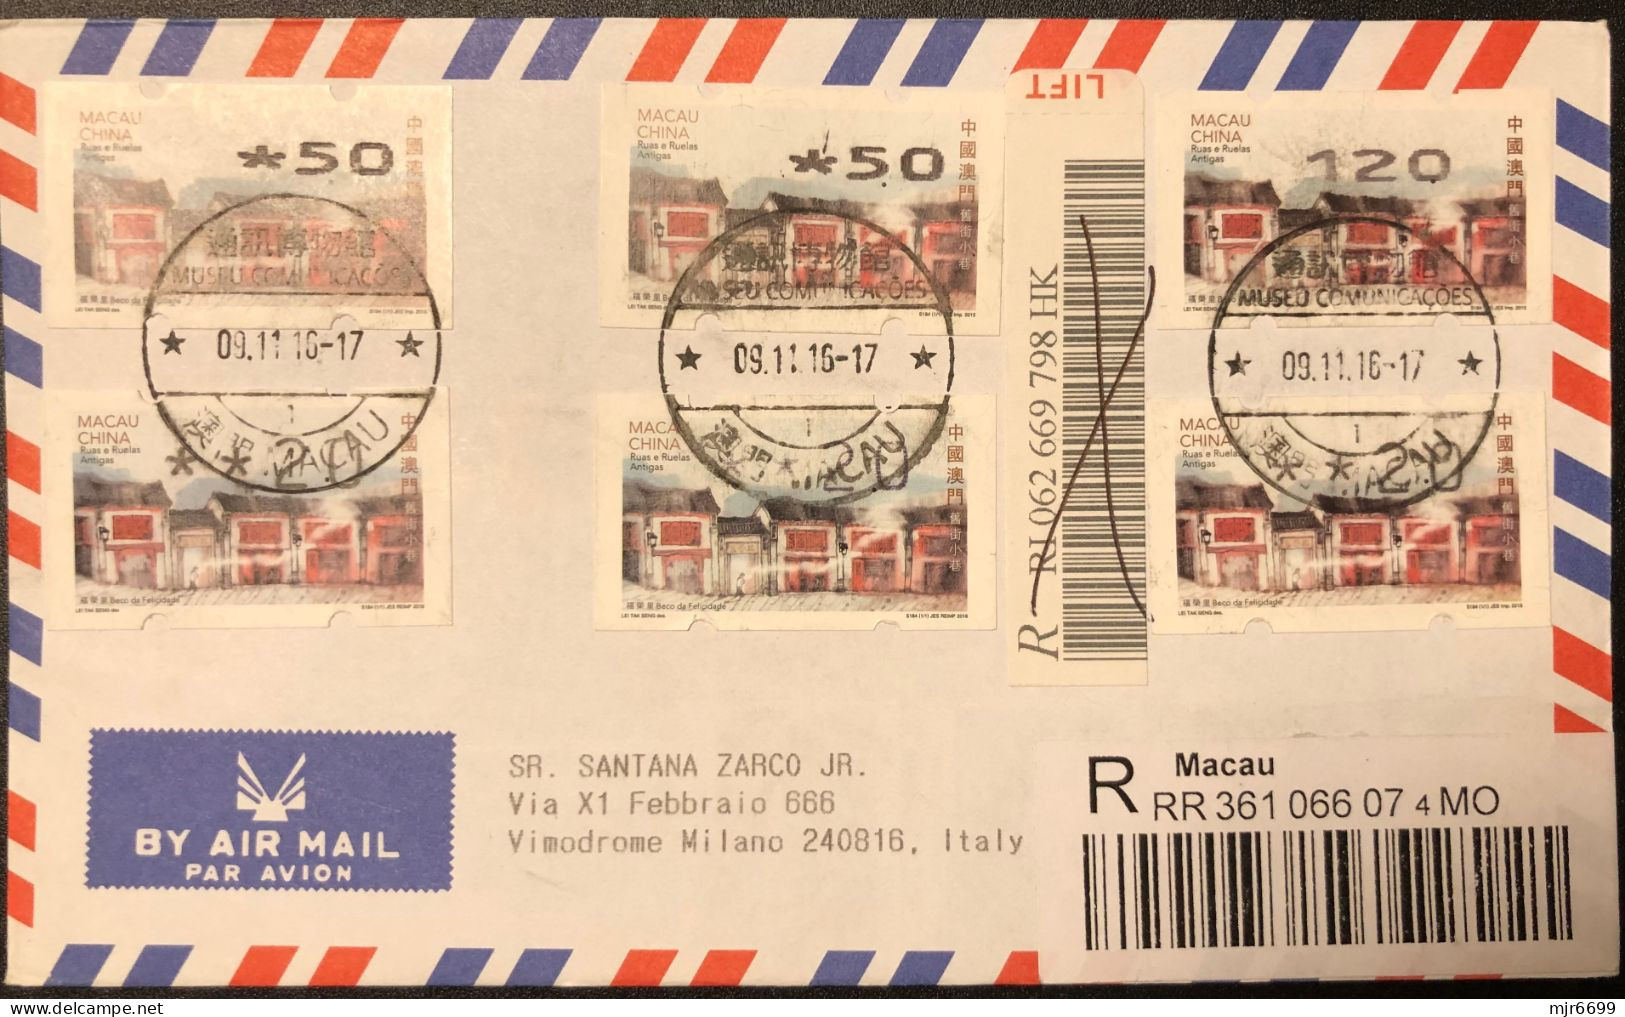 2016 MACAU ATM LABEL OLD STREETS ISSUE, REGISTERED COVER TO ITALY. 12P LABEL WITH PRINTING ERROR, Shift Left. - Automatenmarken